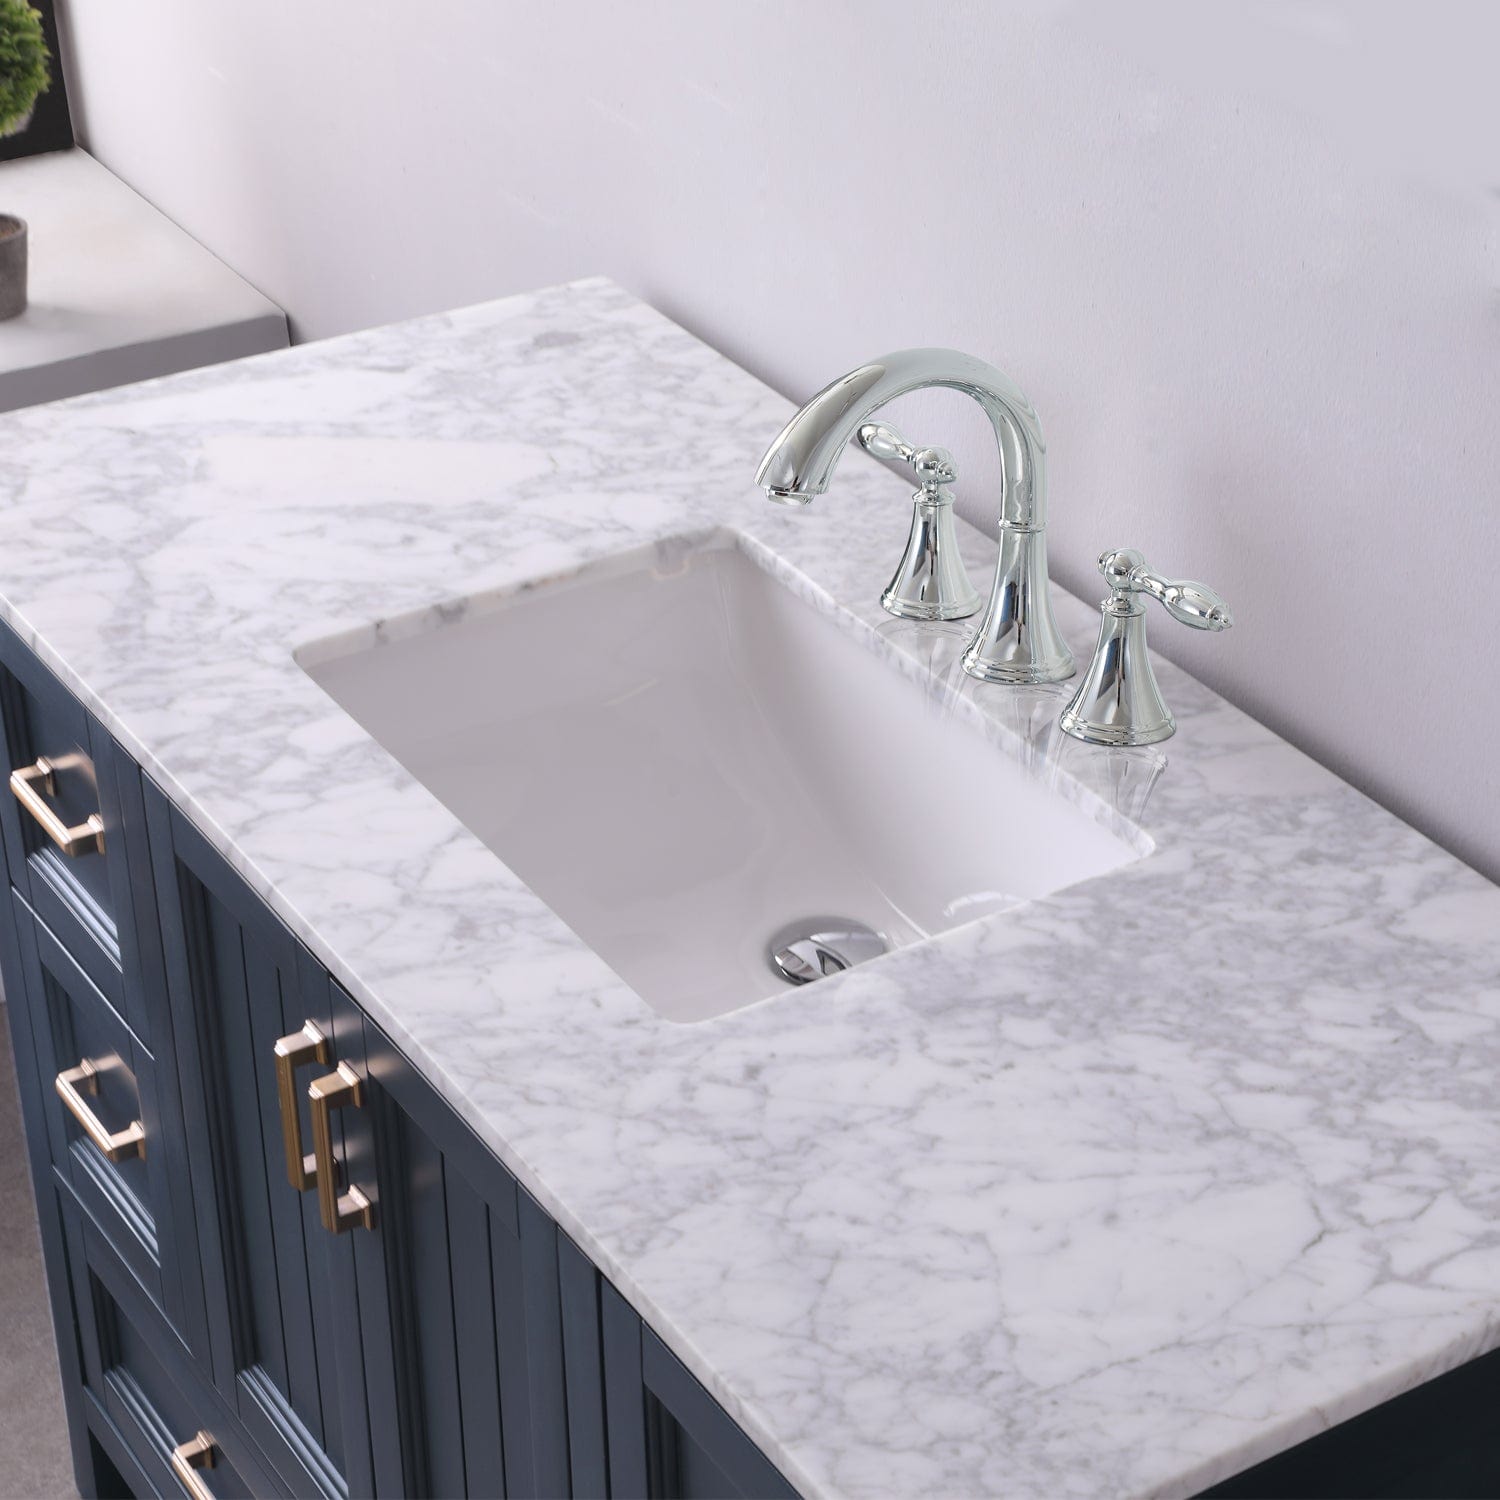 Altair Isla 48" Single Bathroom Vanity Set in Classic Blue and Carrara White Marble Countertop without Mirror 538048-CB-CA-NM - Molaix631112970860Vanity538048-CB-CA-NM